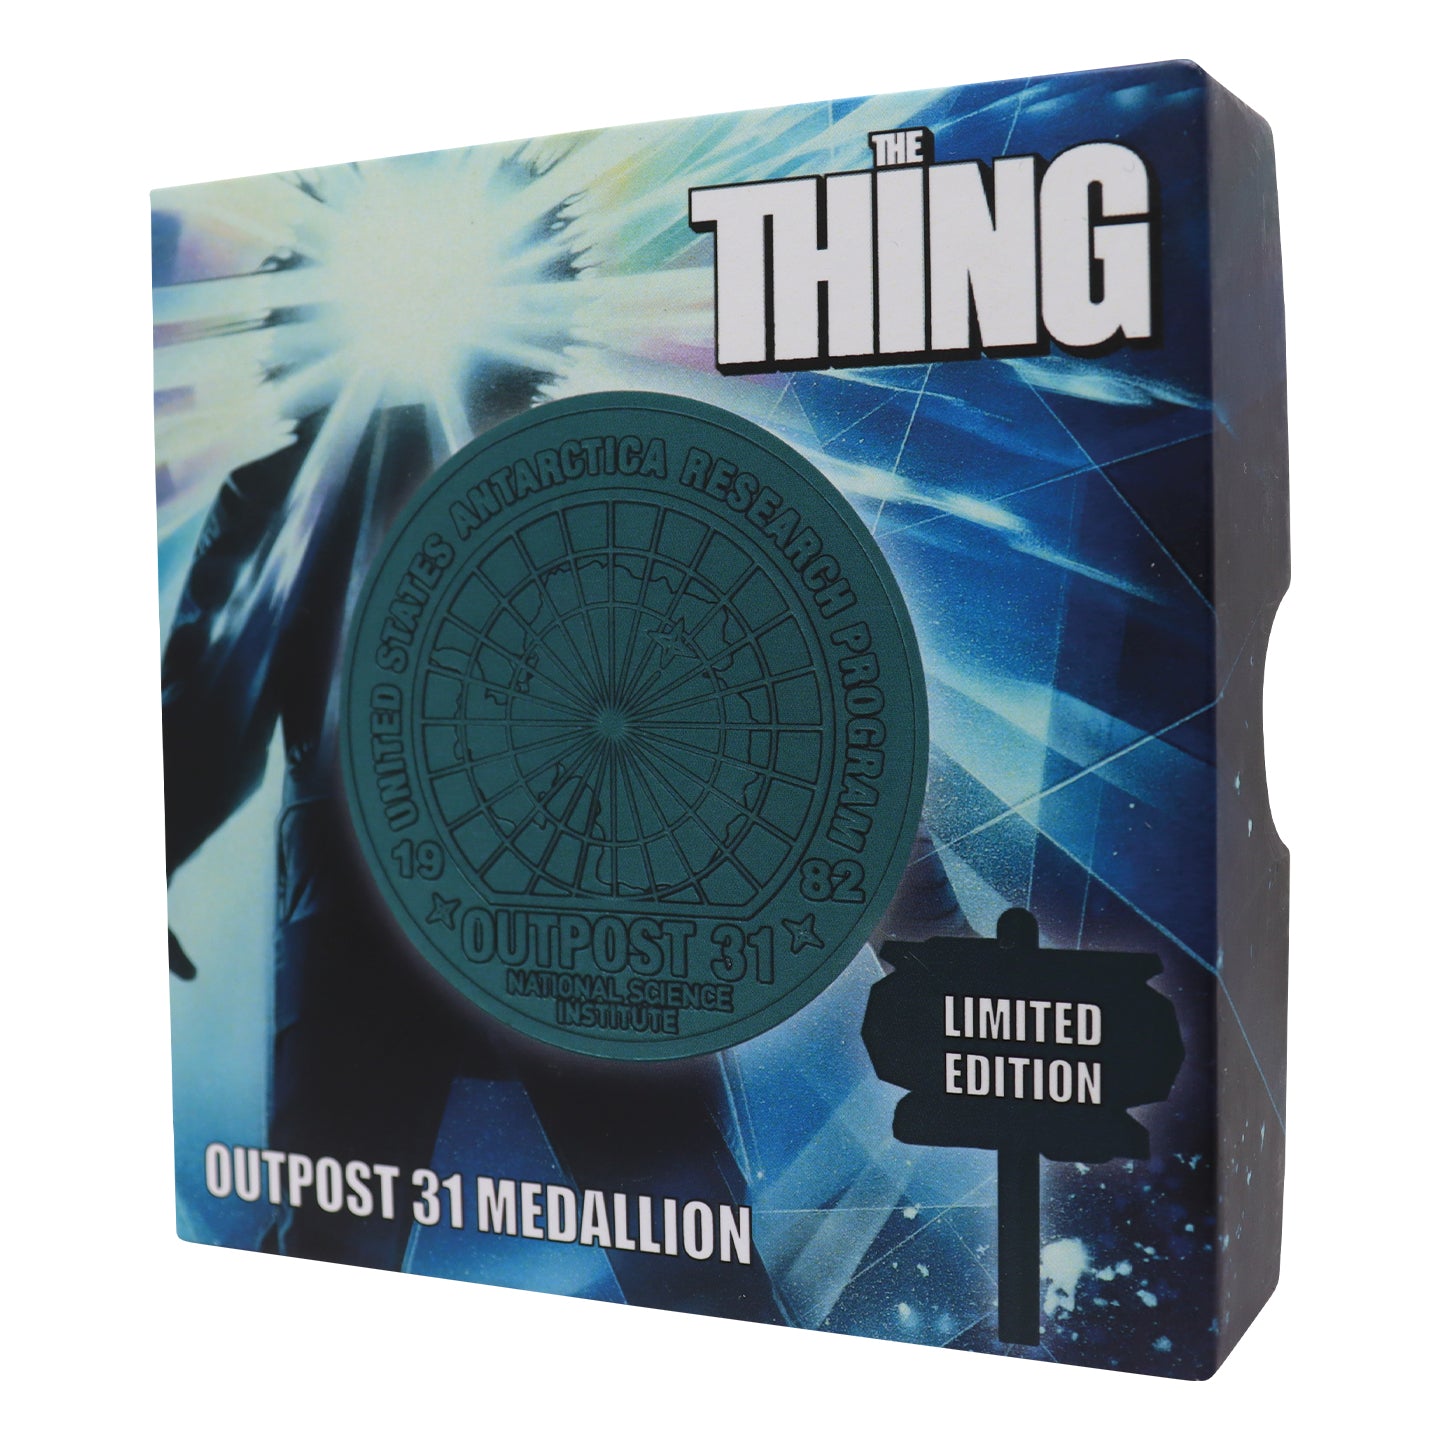 The Thing Limited Edition Outpost 31 Medallion